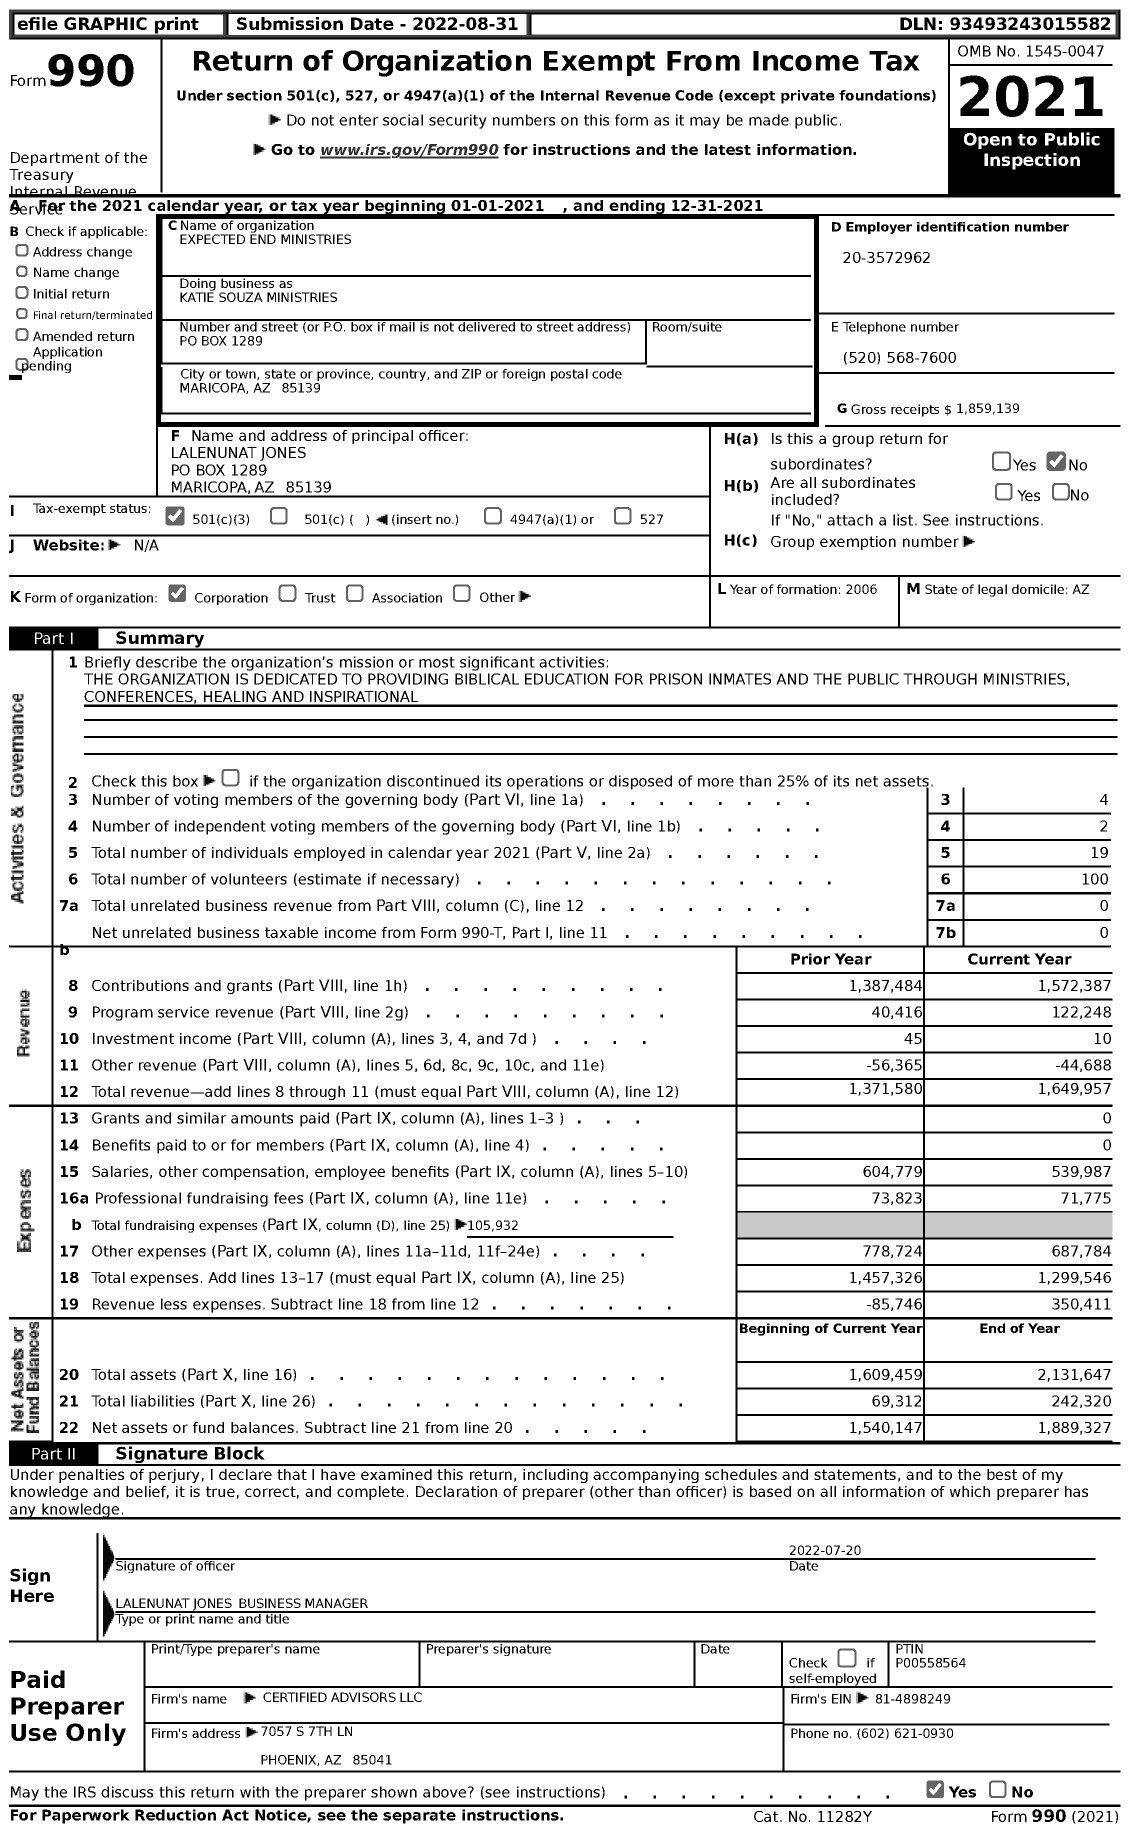 Image of first page of 2021 Form 990 for Katie Souza Ministries